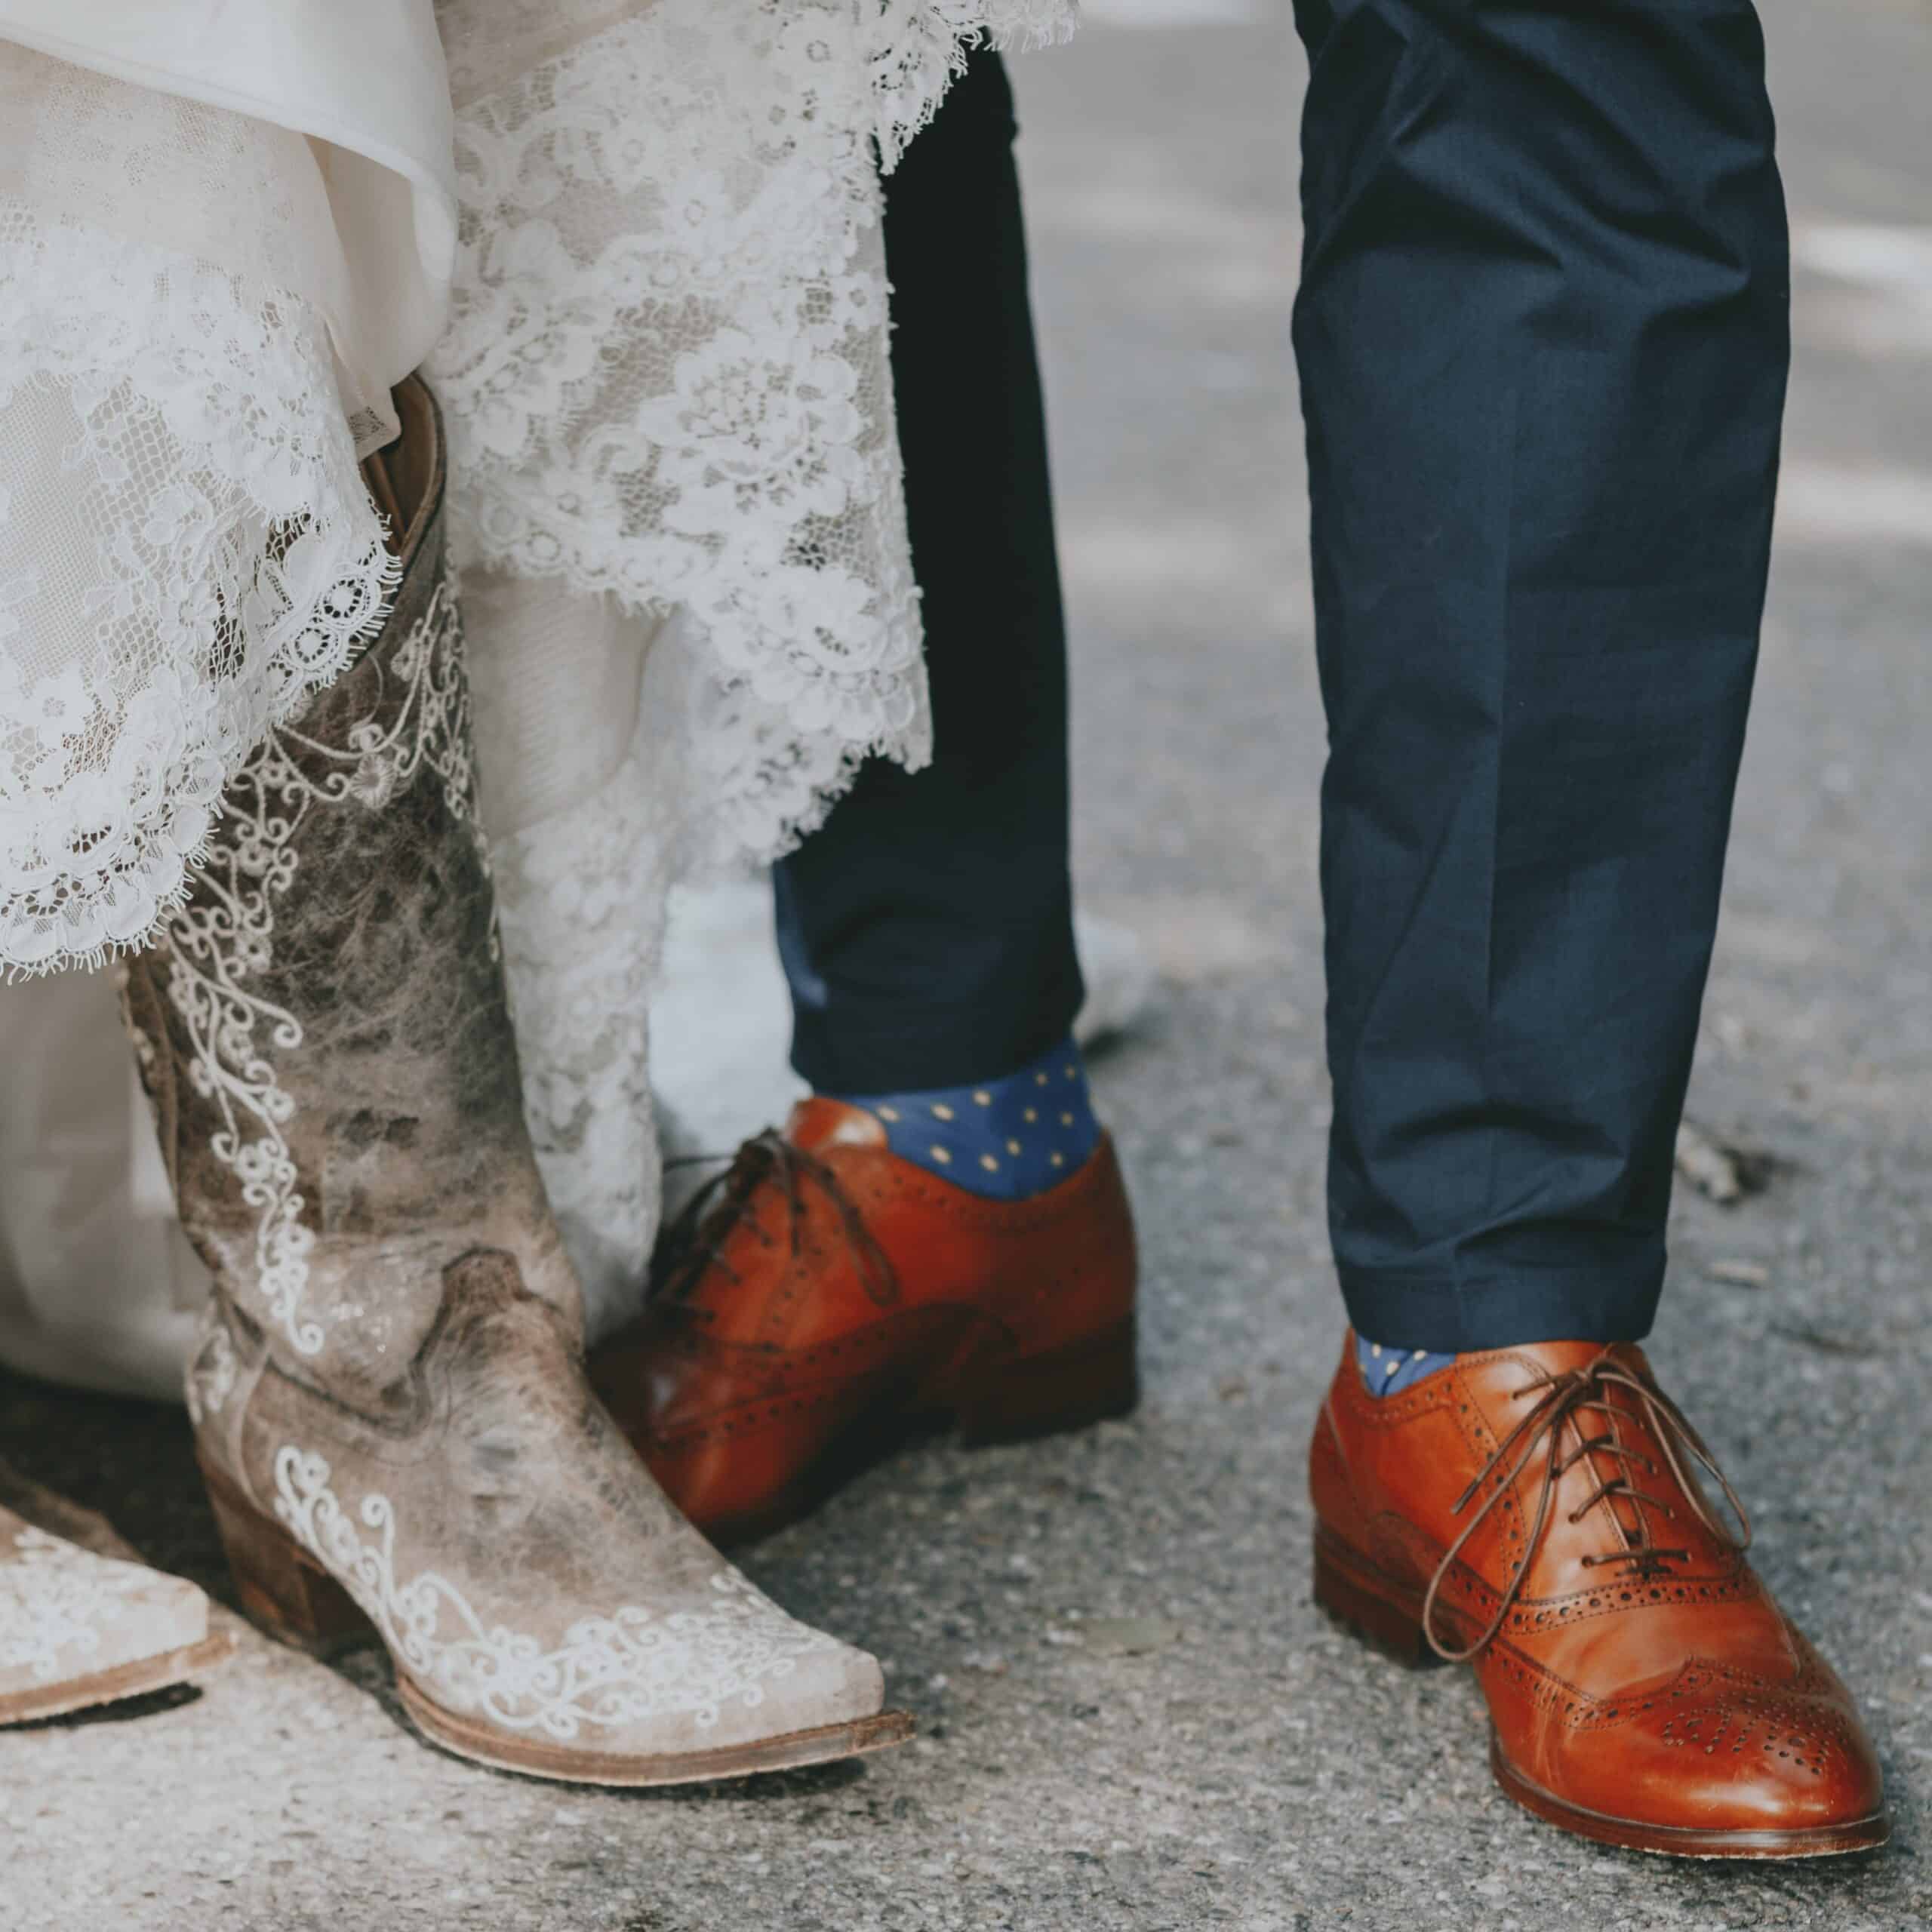 Wedding Dos And Don’ts: Can You Wear Boots To A Wedding?